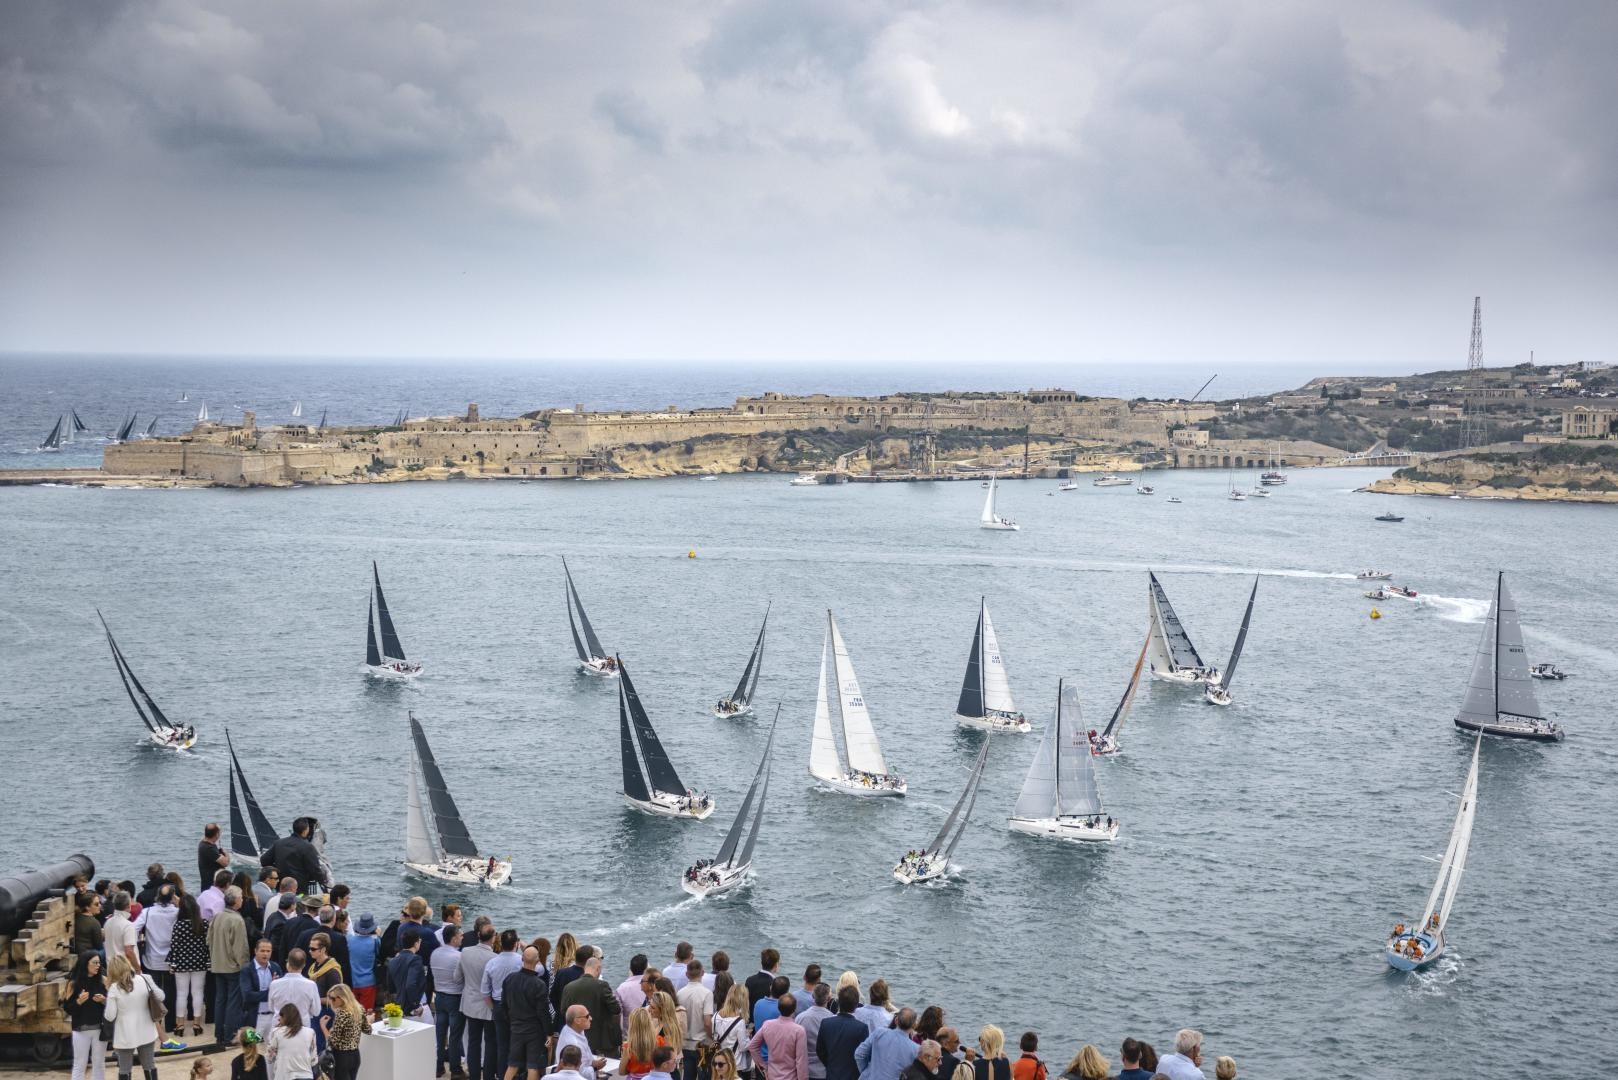 Start of the 2018 Rolex Middle Sea Race